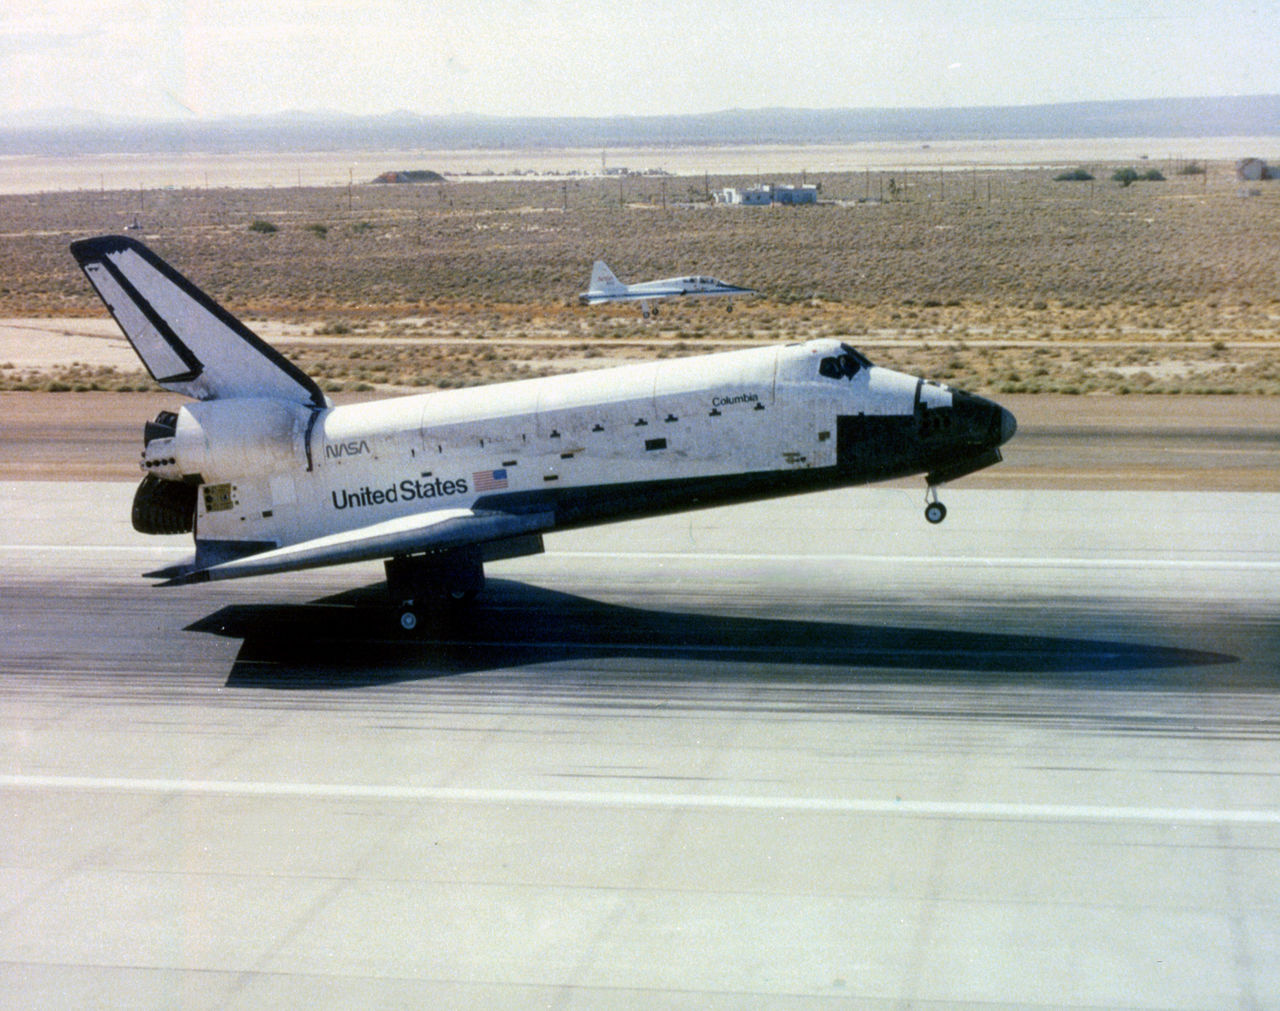 Columbia touches down at Edwards Air Force Base, Calif., on 4 July 1982, concluding the shuttle's fourth and final Orbital Flight Test. Photo Credit: NASA